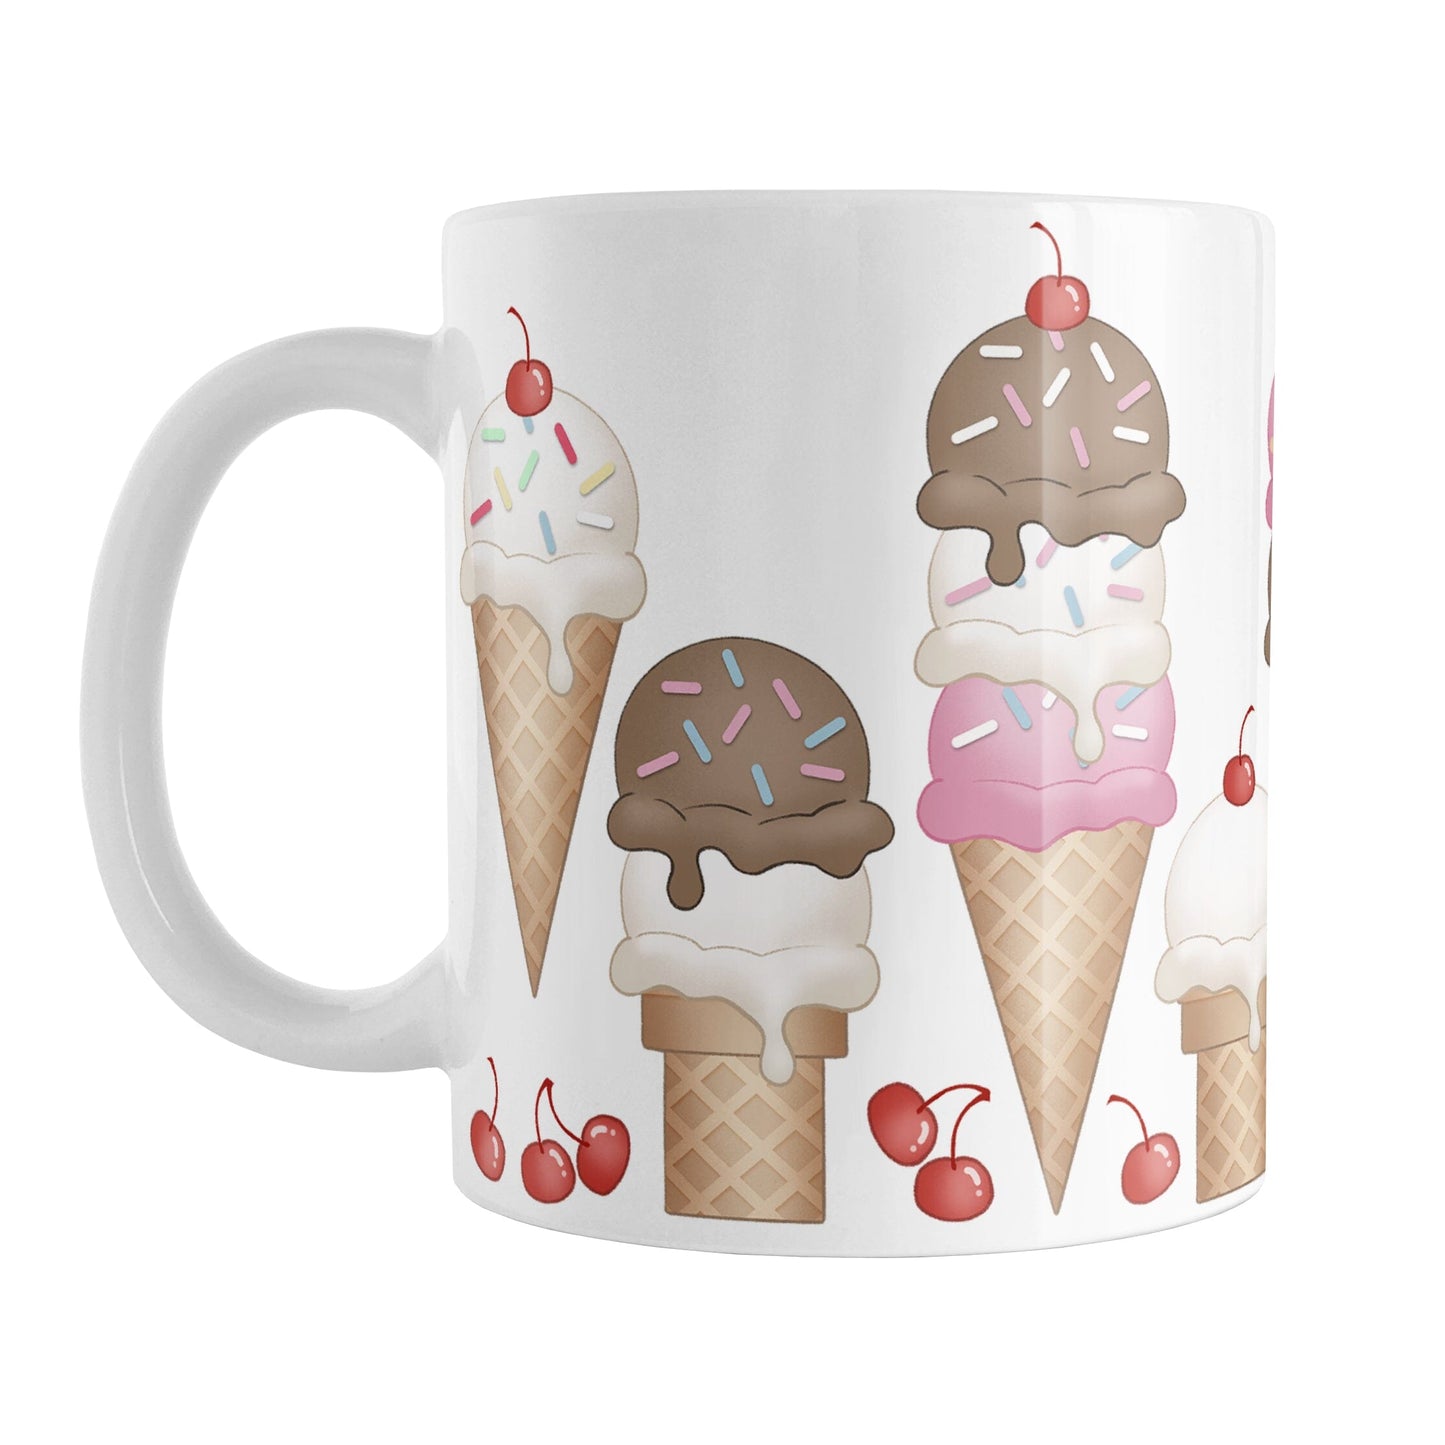 Ice Cream Cones and Cherries Mug (11oz) at Amy's Coffee Mugs. A ceramic coffee mug designed with hand-drawn ice cream cones with chocolate, vanilla, and strawberry scoops, sprinkles, and cherries. 